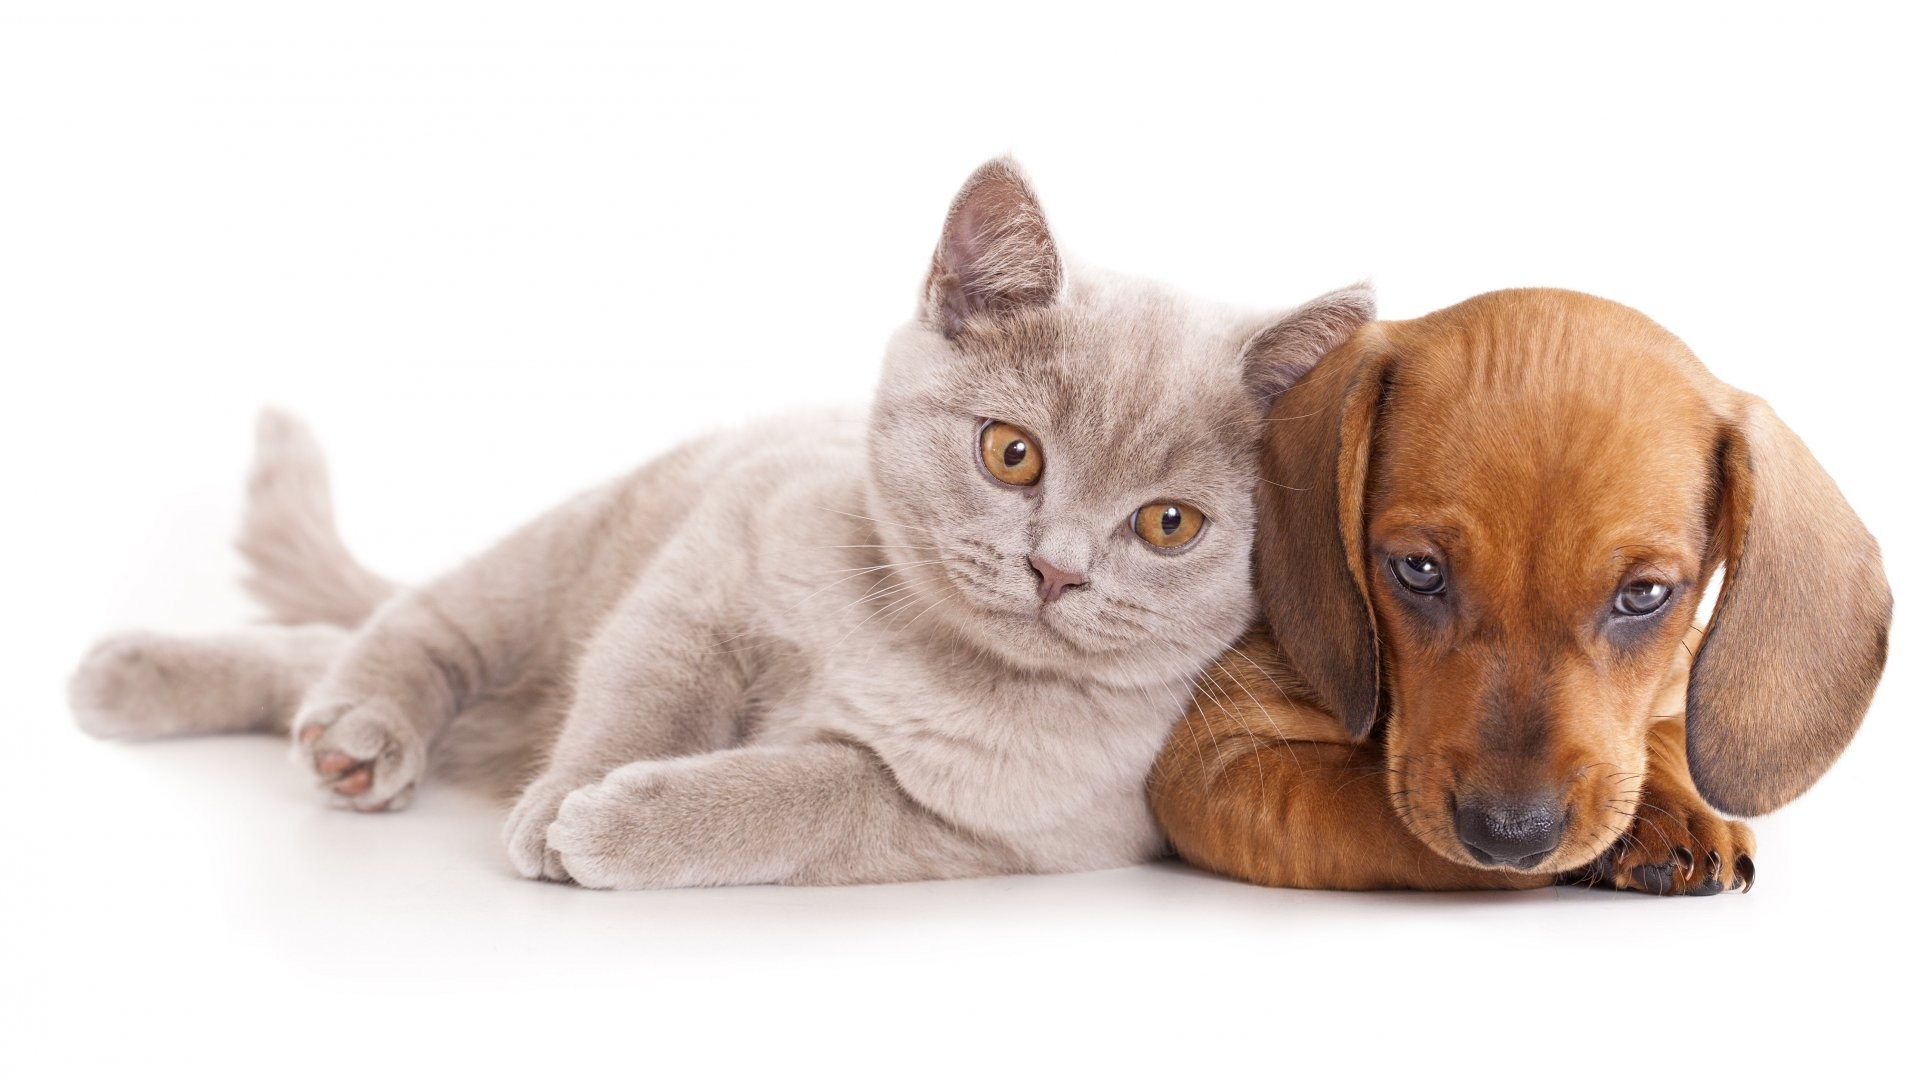 1920x1080 Best Cute cat dog free stock photos download